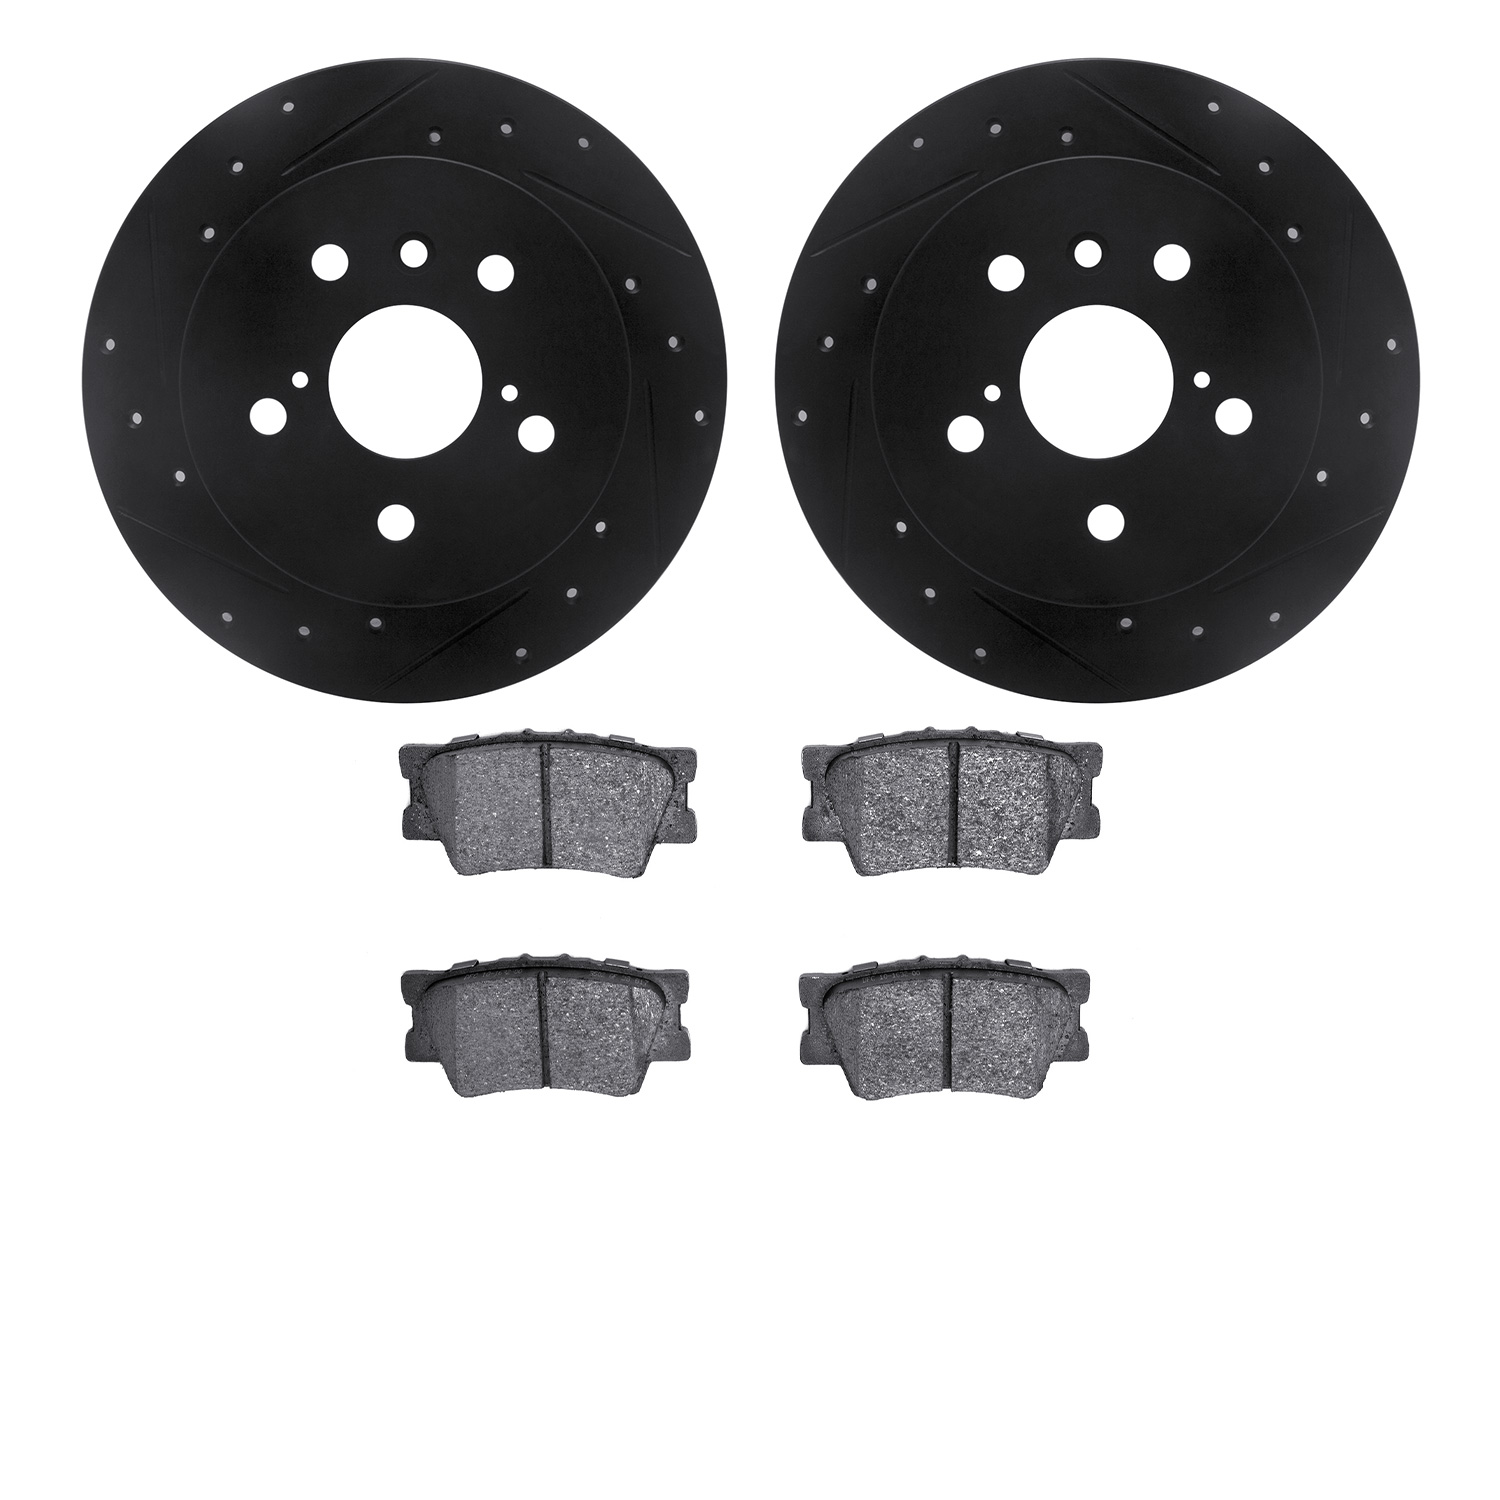 8302-76181 Drilled/Slotted Brake Rotors with 3000-Series Ceramic Brake Pads Kit [Black], Fits Select Lexus/Toyota/Scion, Positio